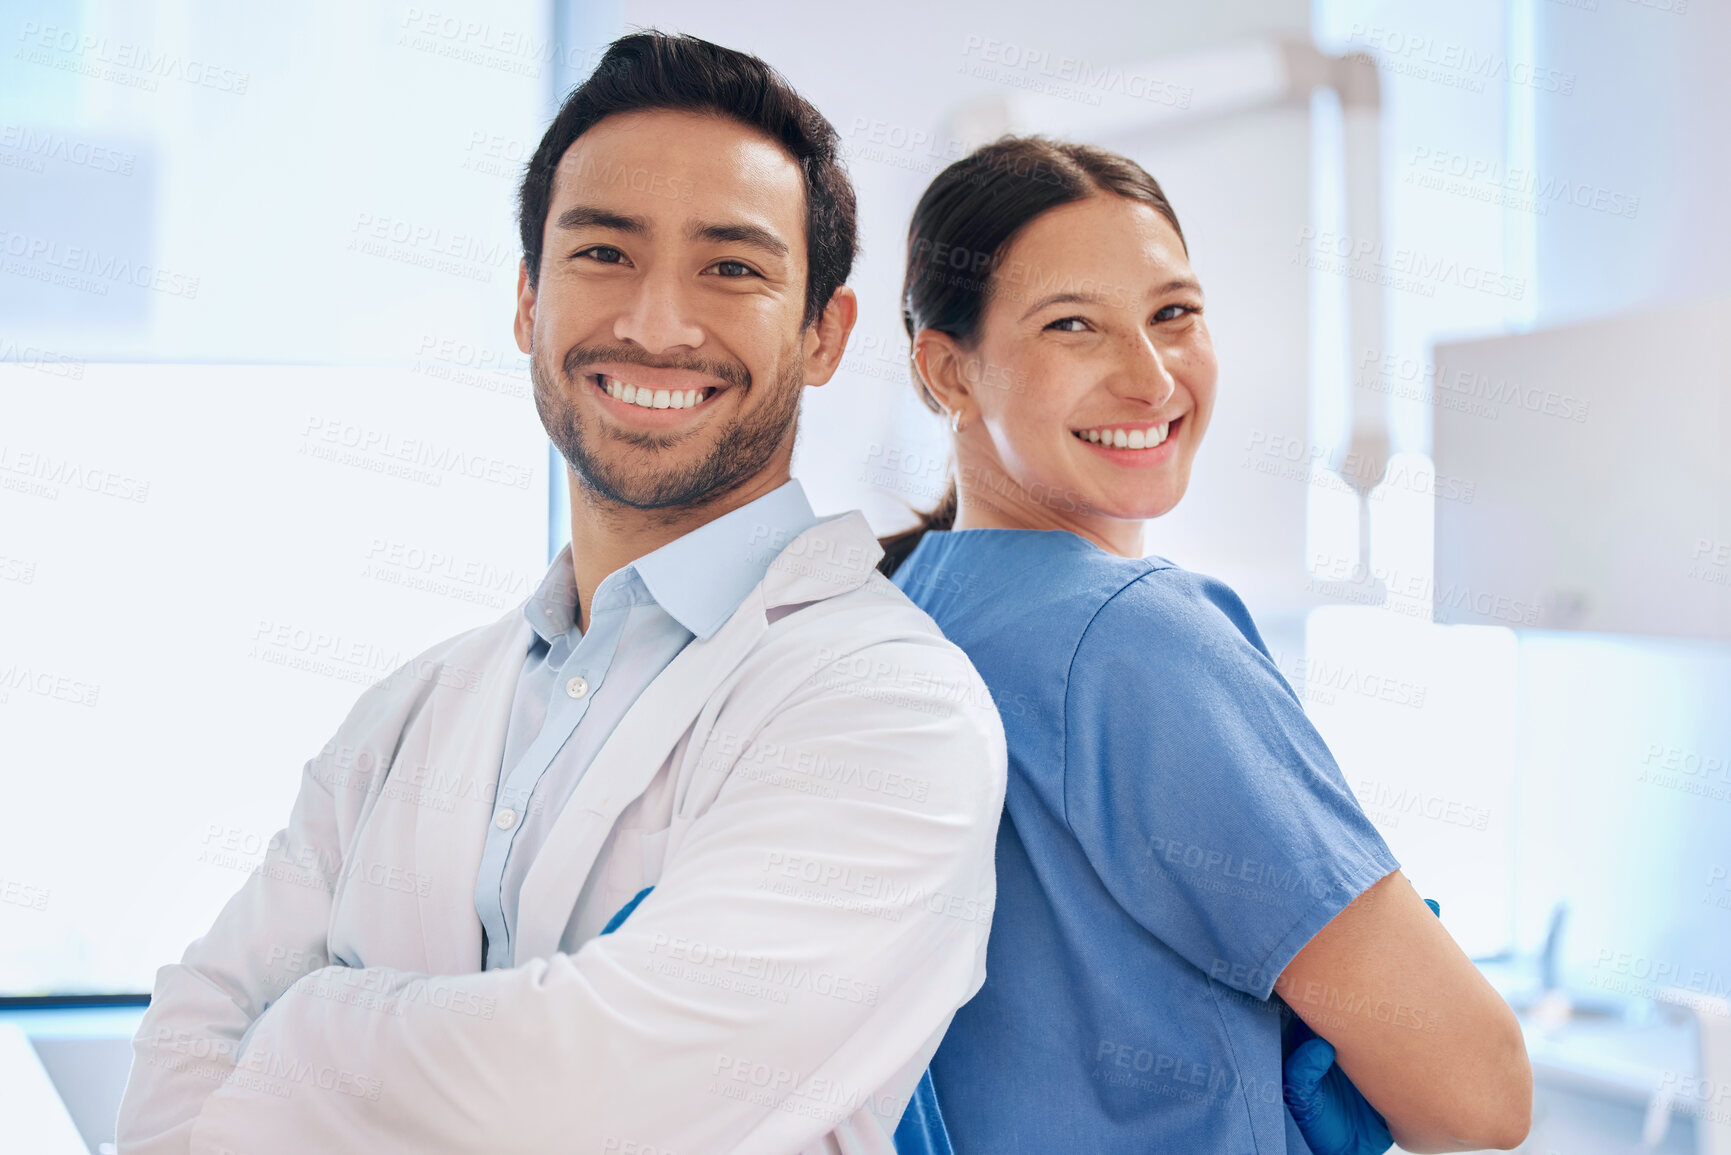 Buy stock photo Shot of a young dentist with his assistant